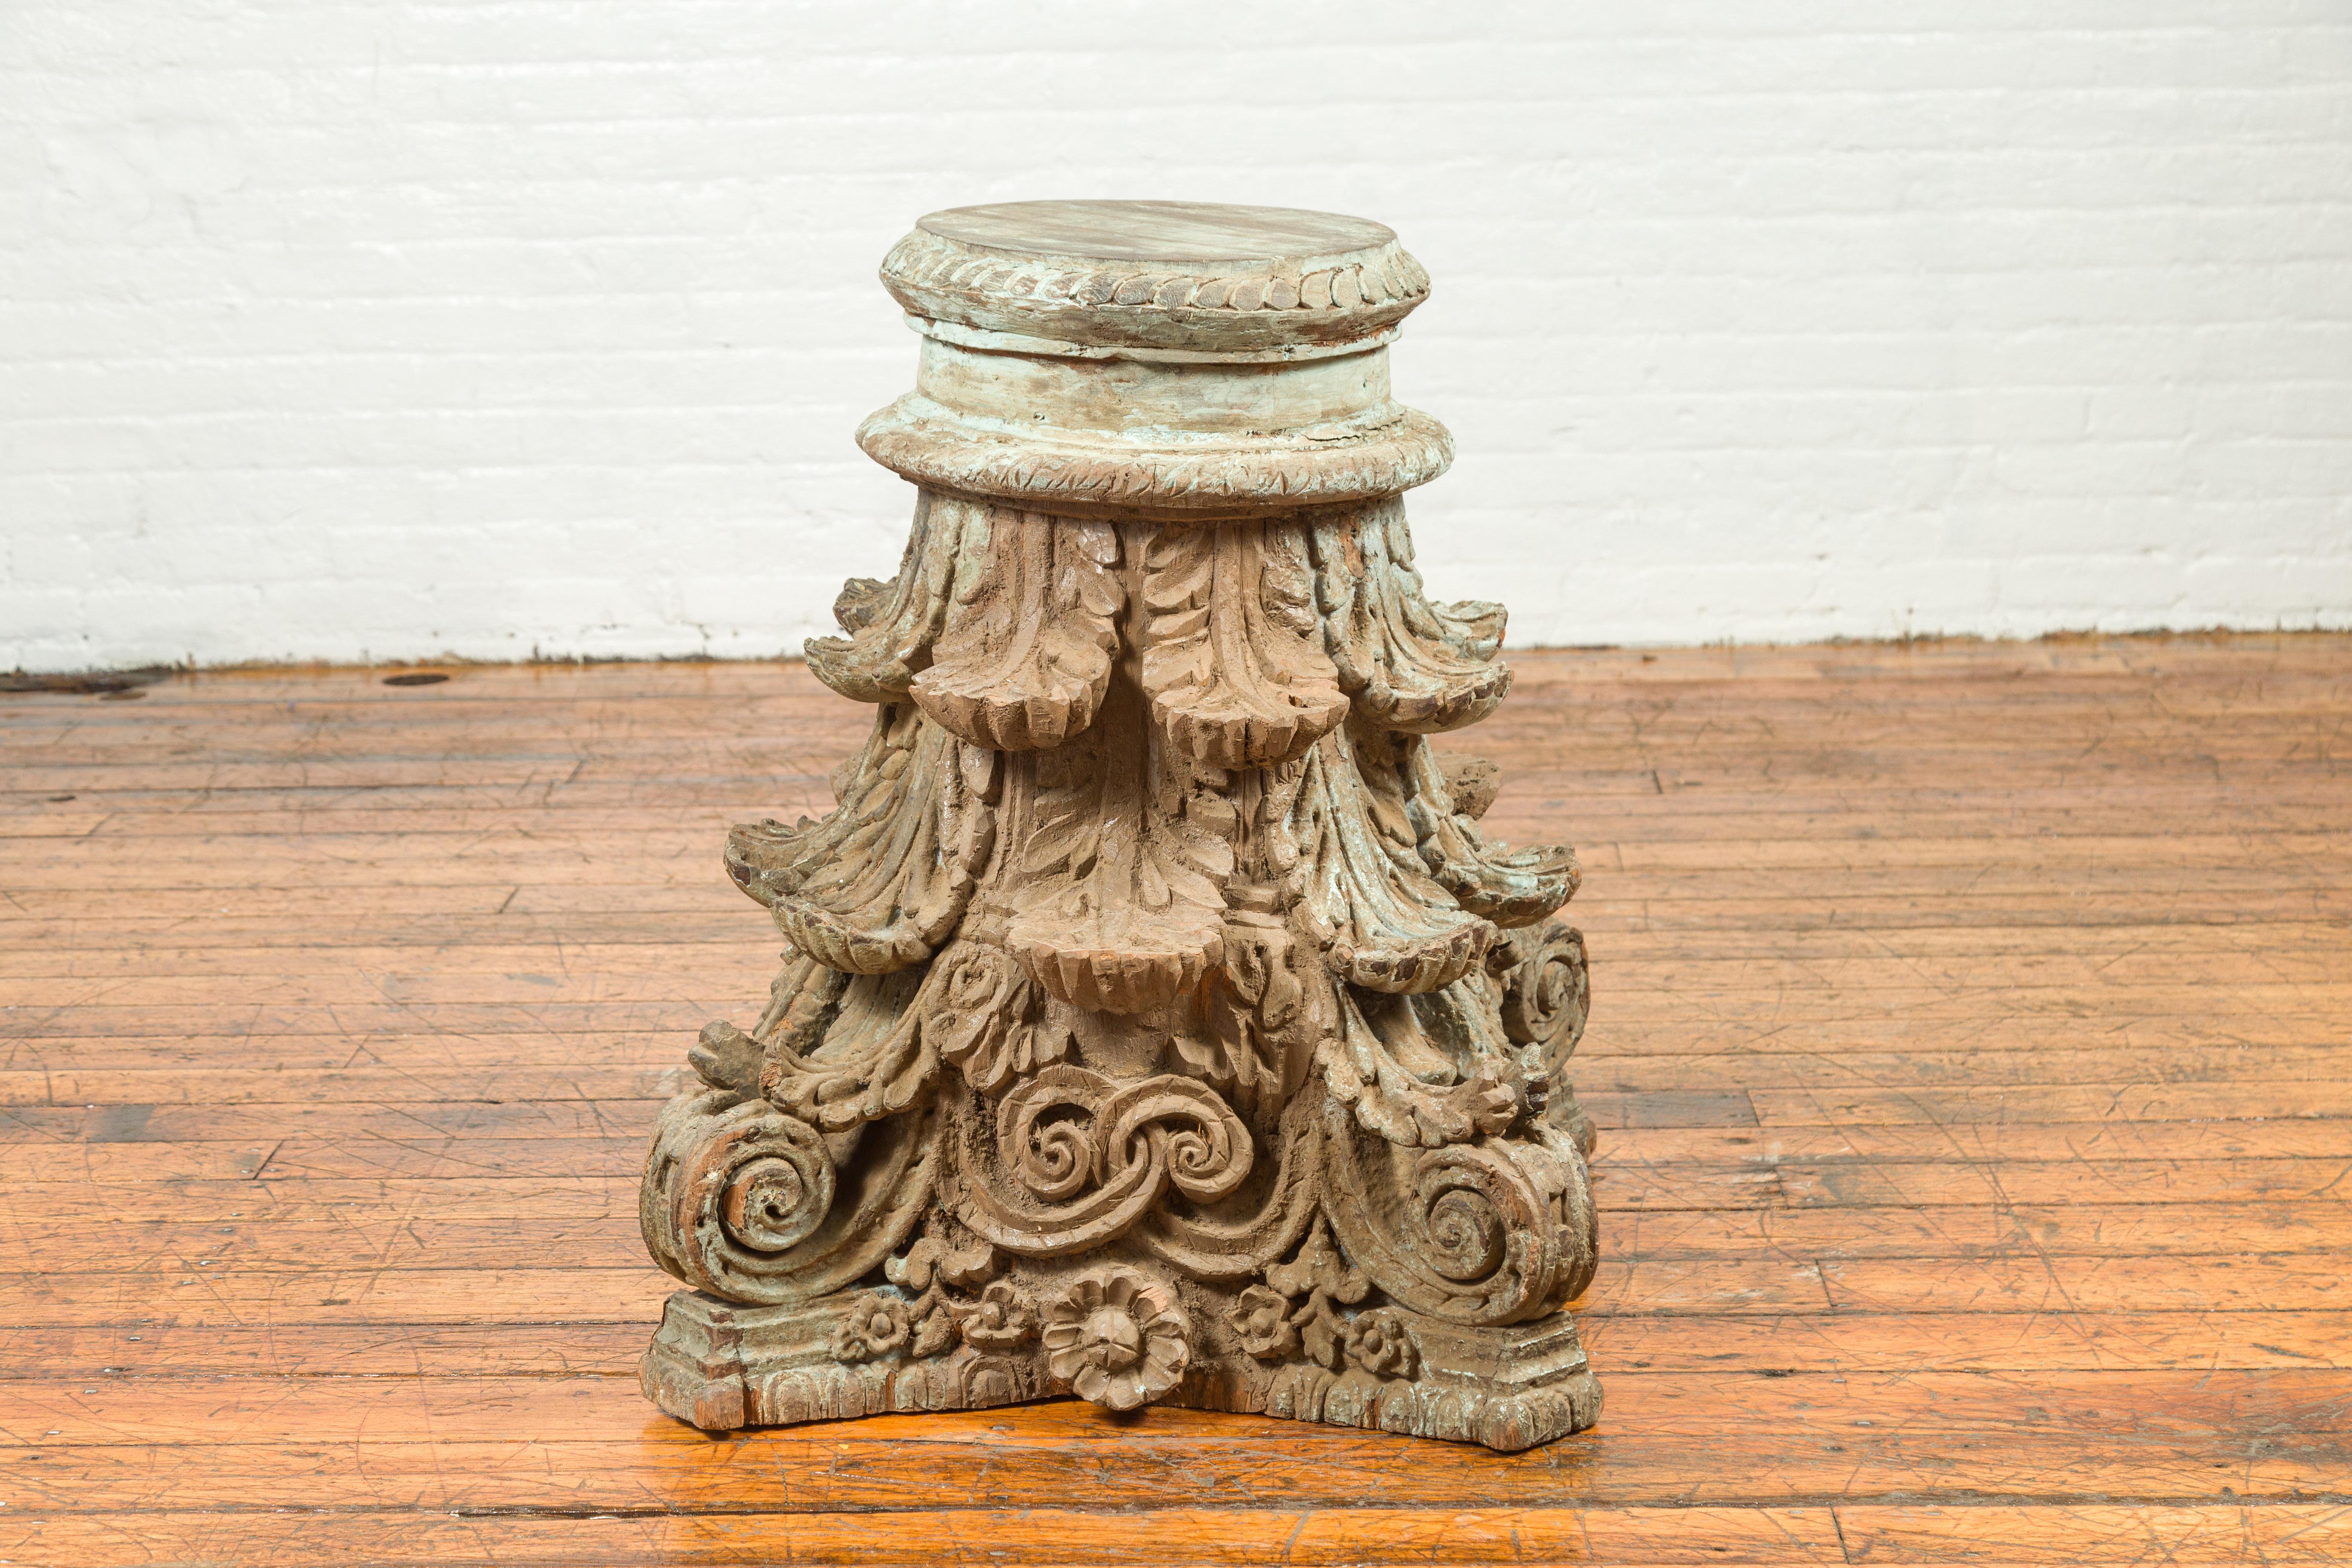 Indian Antique Corinthian Temple Capital Carving with Distressed Patina For Sale 5